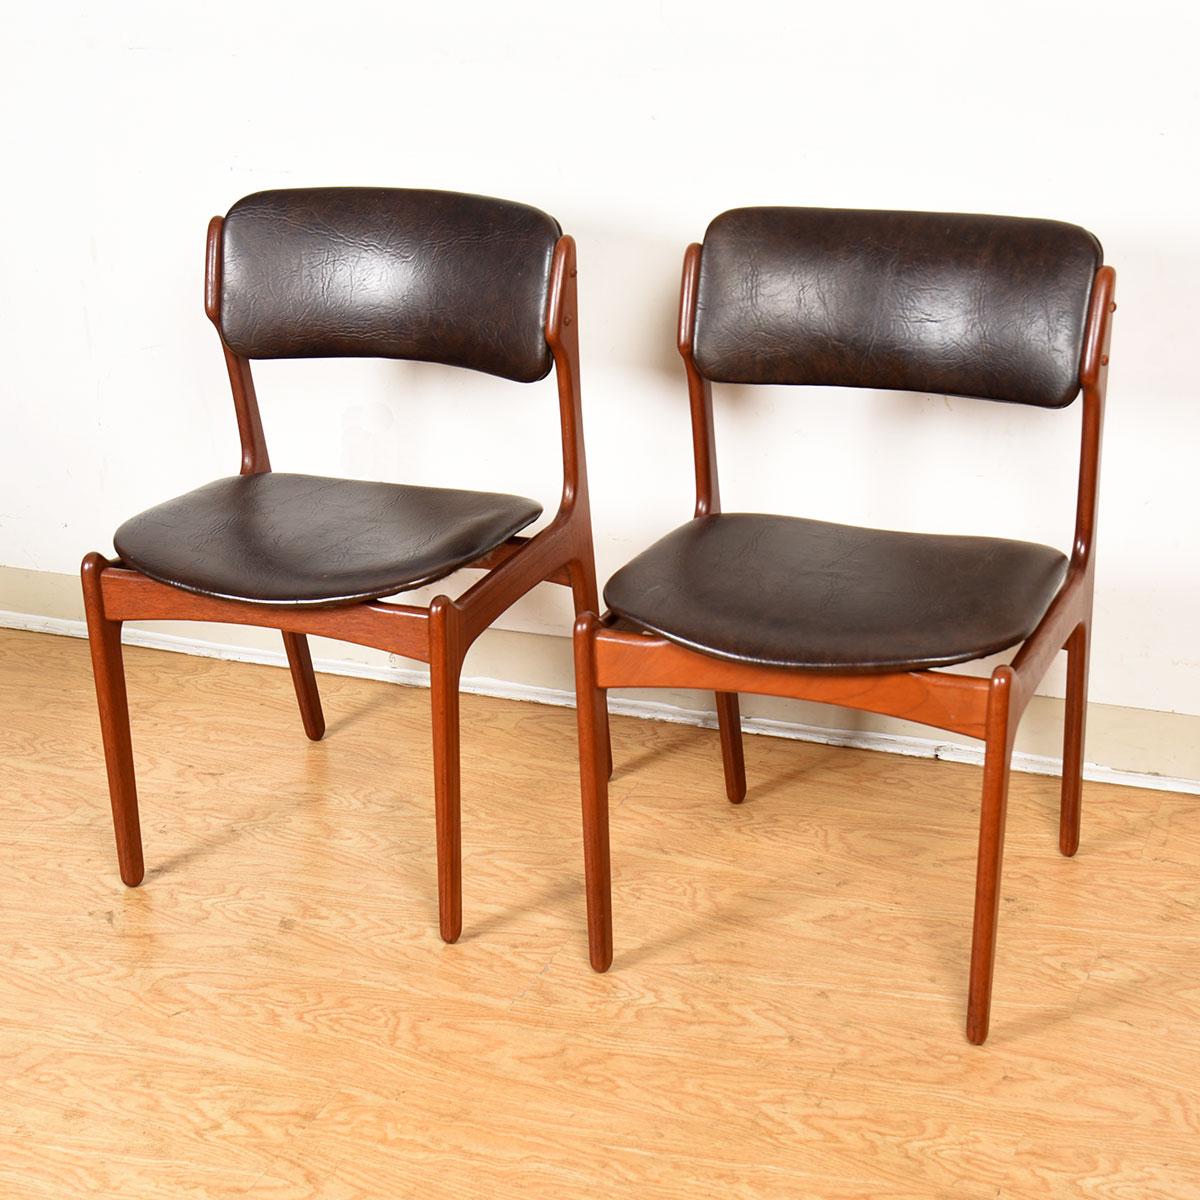 Mid-Century Modern Pair of Danish Teak Dining Chairs in Chocolate Brown by Erik Buch For Sale